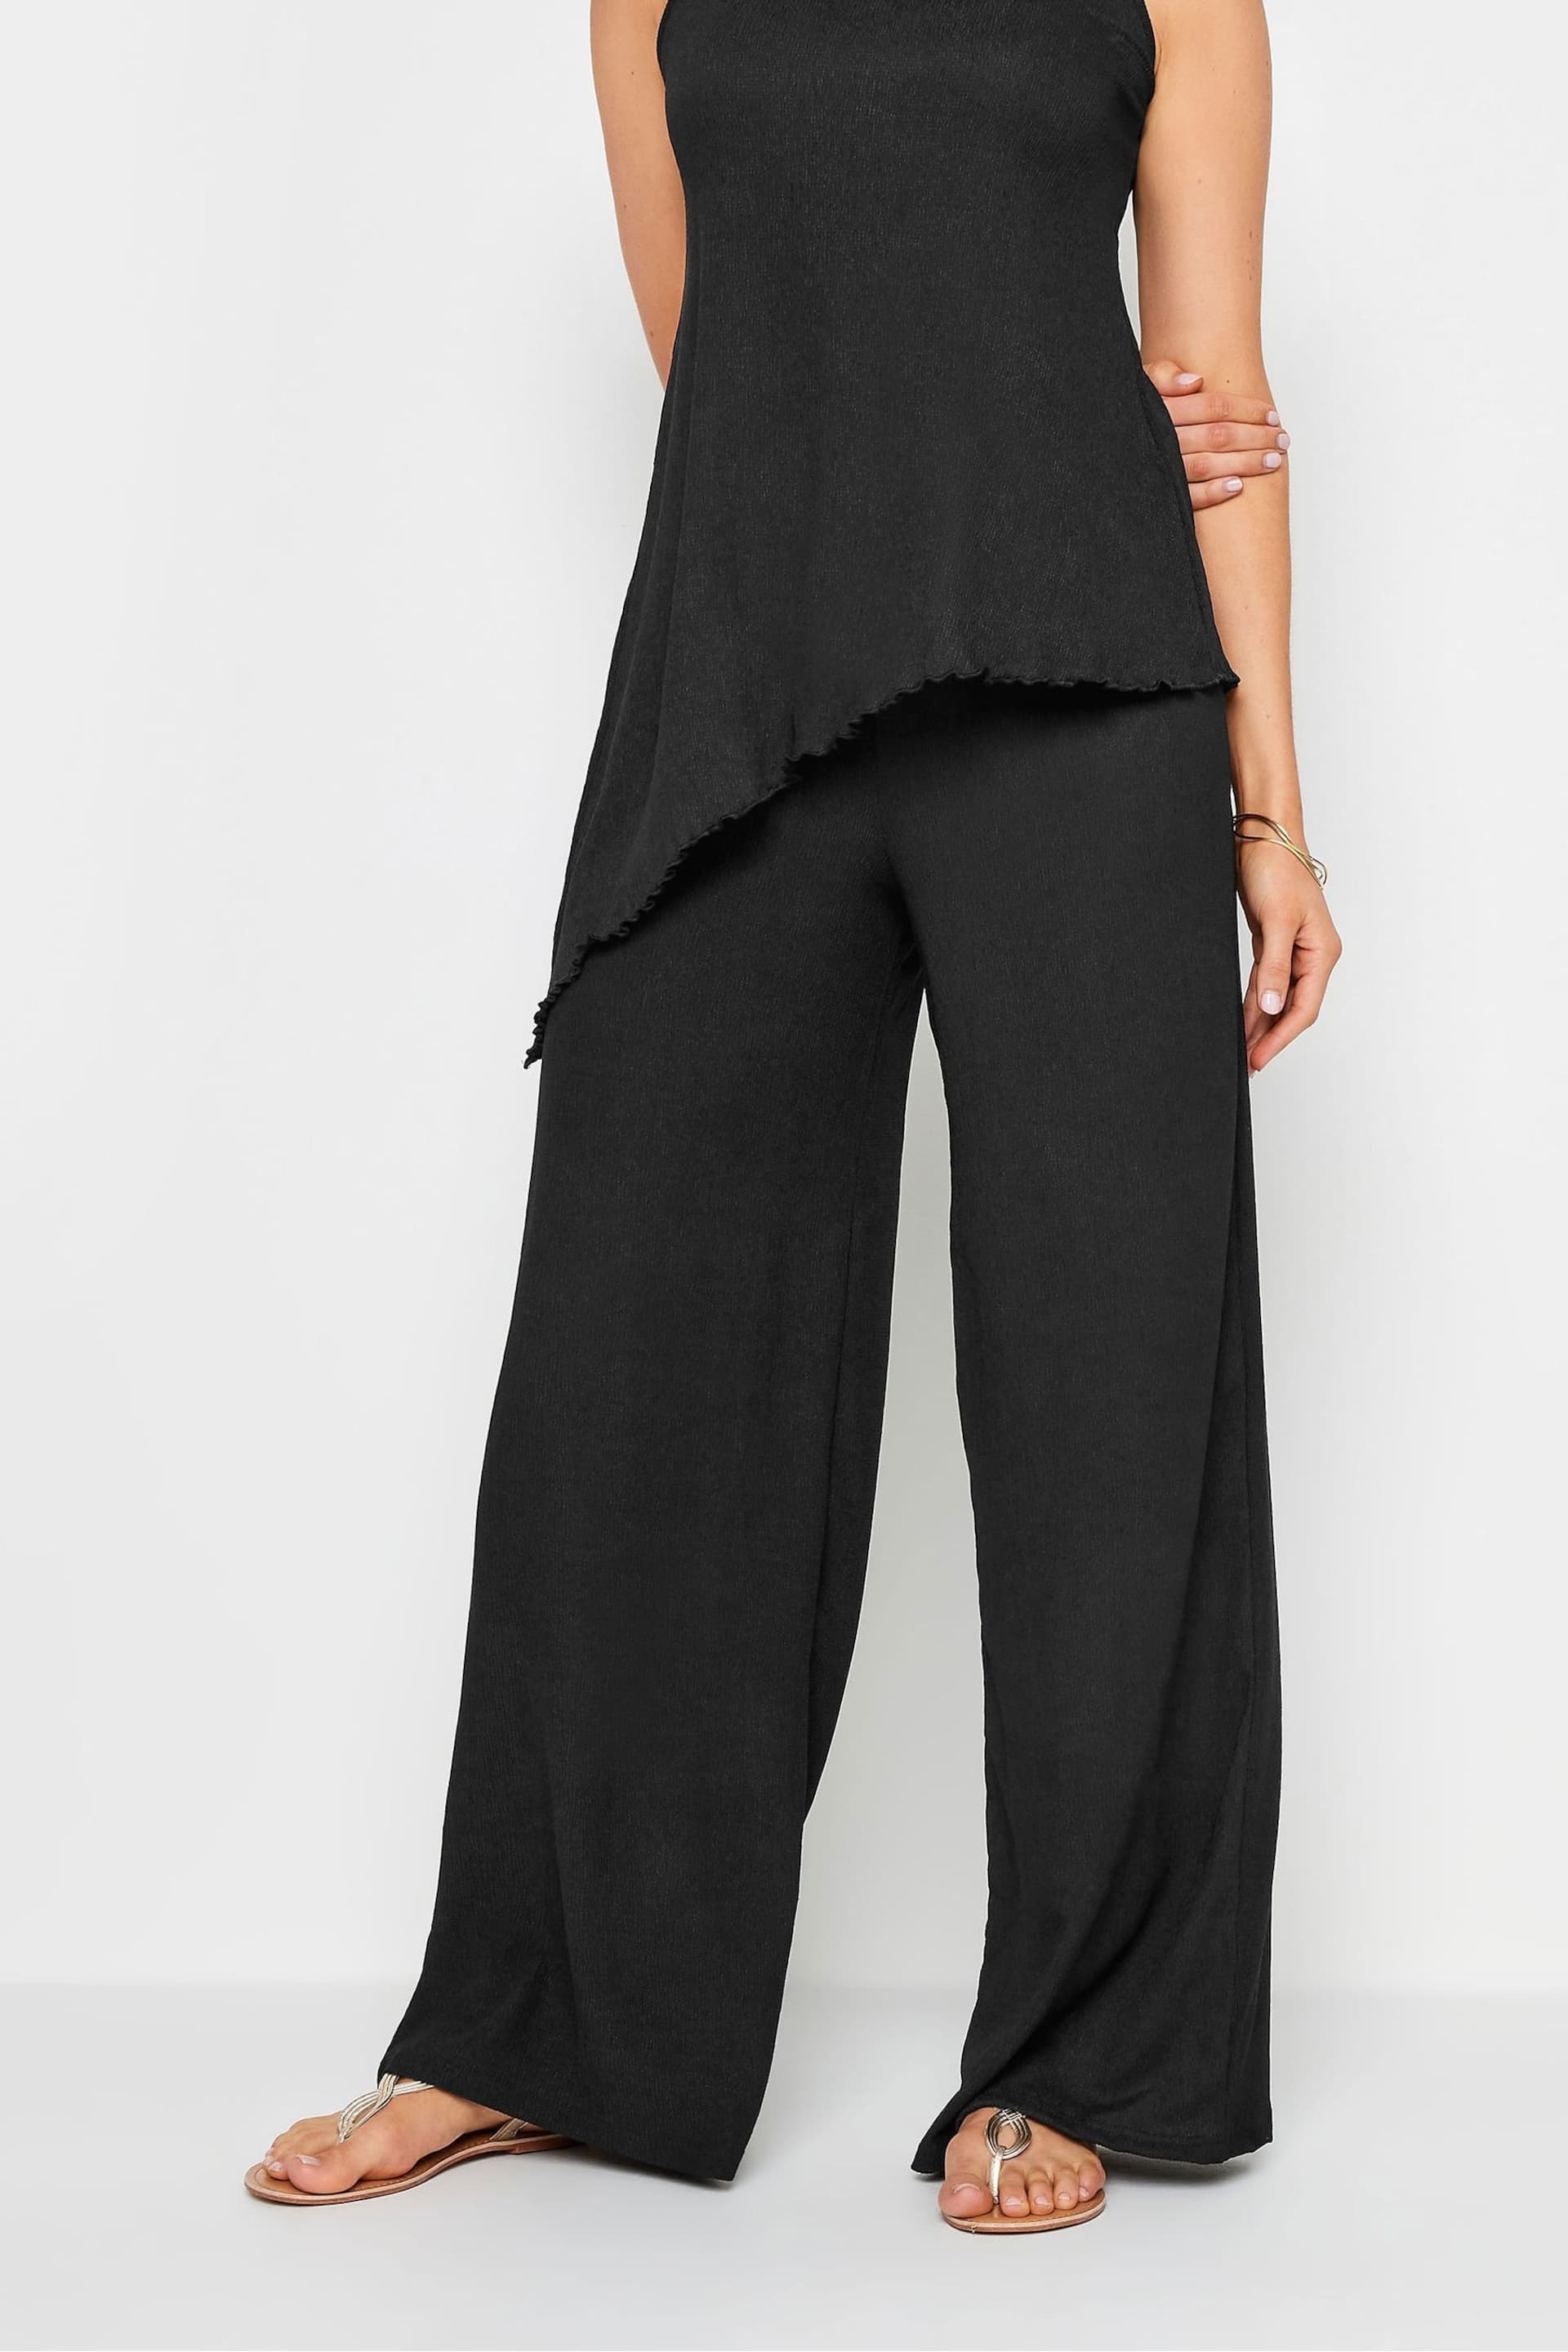 Long Tall Sally Blue Long Tall Sally Textured Wide Leg Trousers - Image 2 of 4